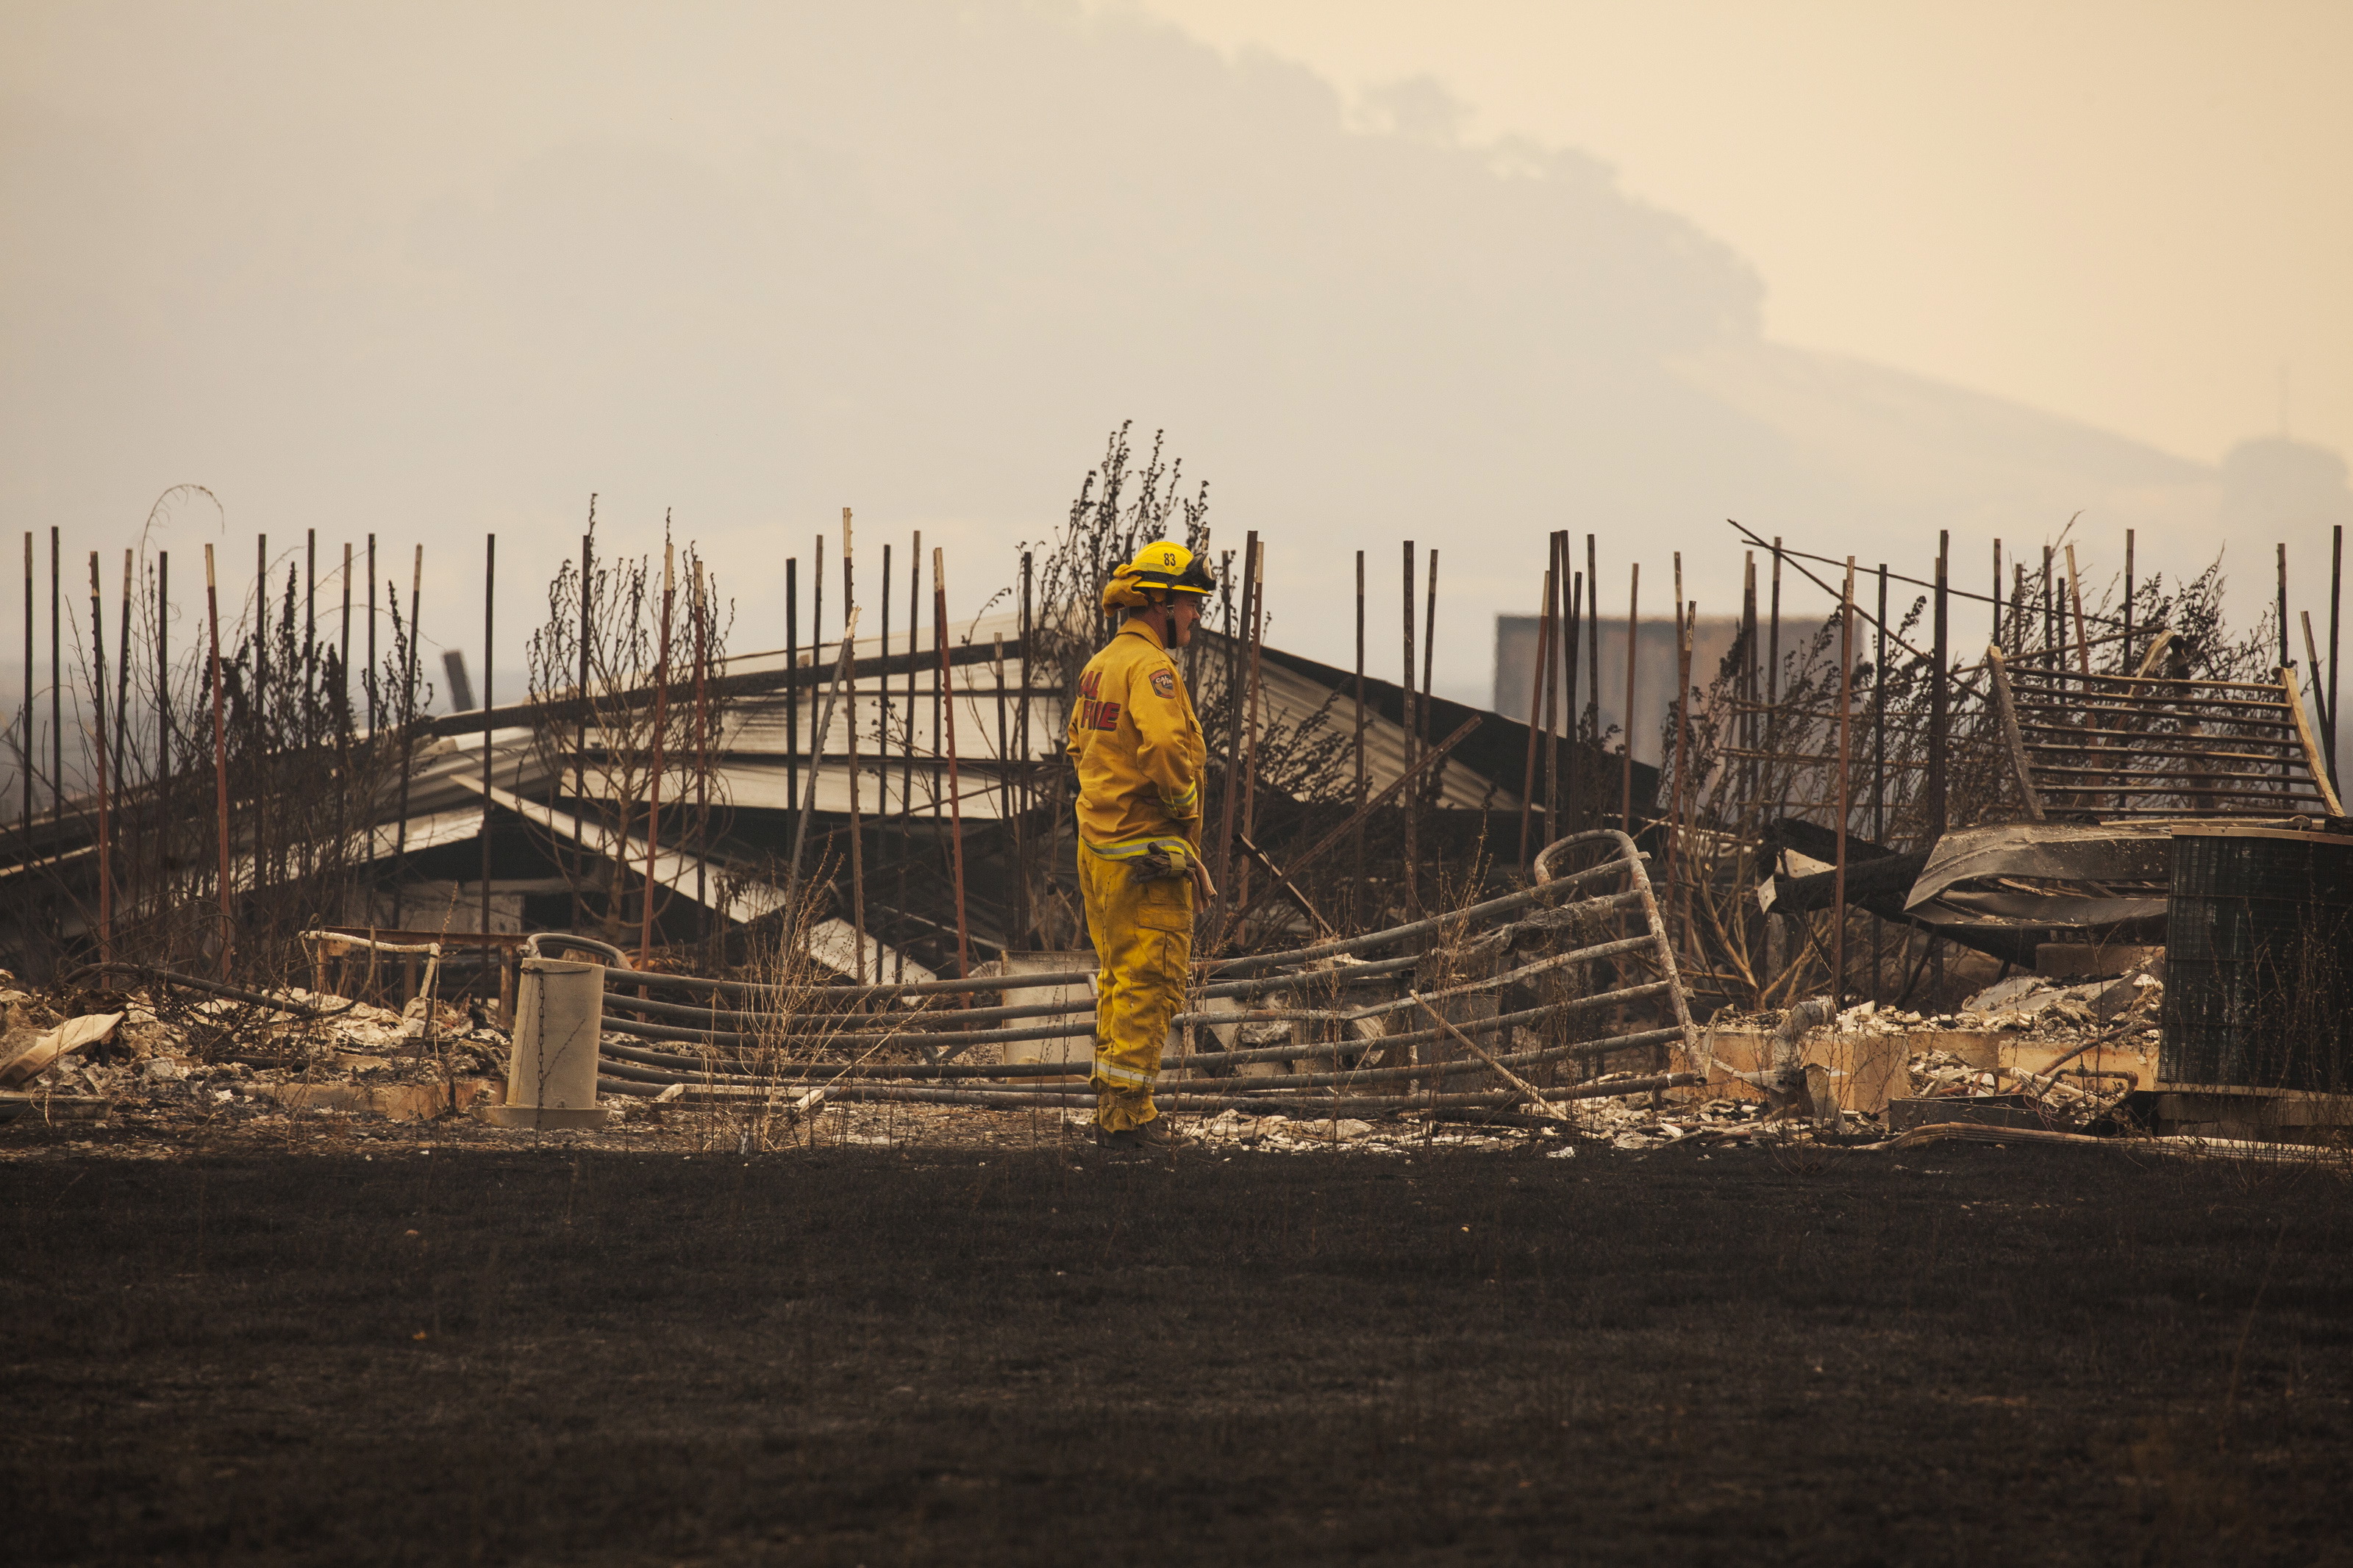 A firefighter surveys a destroyed home at the “Valley Fire” near Middleton, California, September 14, 2015. Fire officials saying they expect the property toll to climb. (Photo: REUTERS/David Ryder/Newscom)